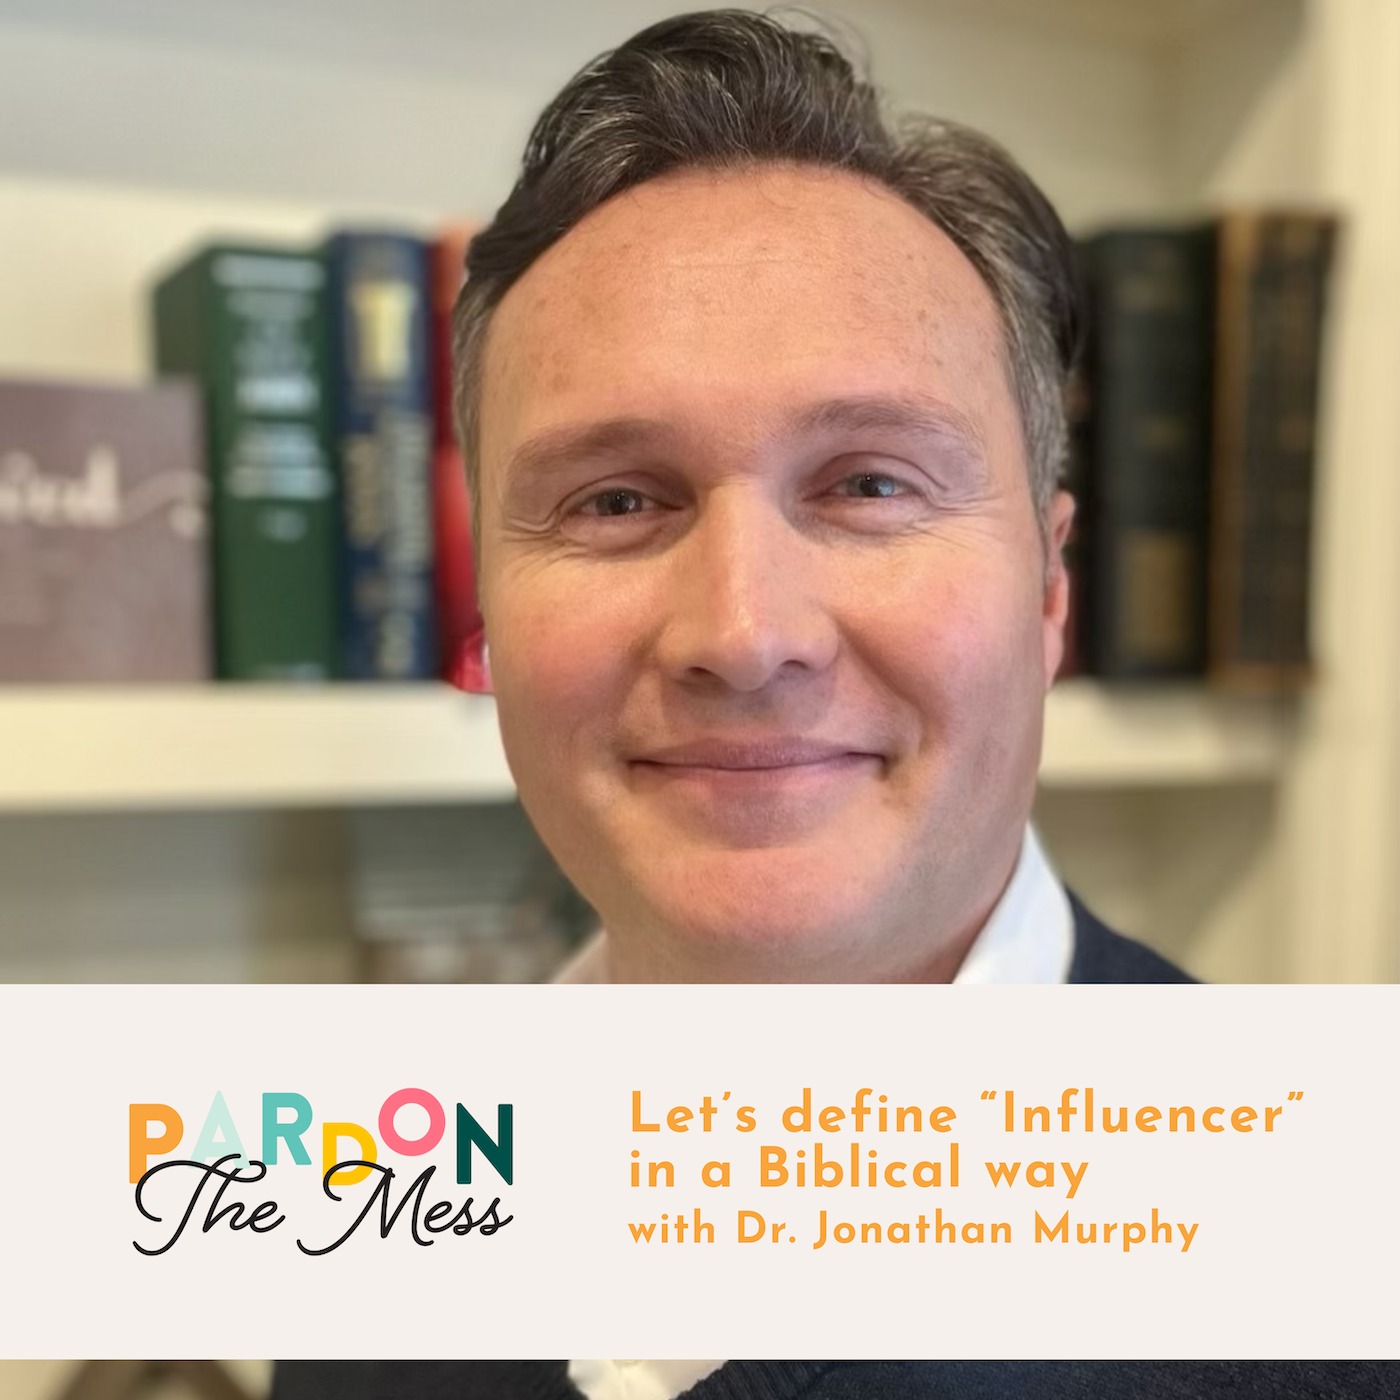 Let’s Define “Influencer” in a Biblical Way with Dr. Jonathan Murphy